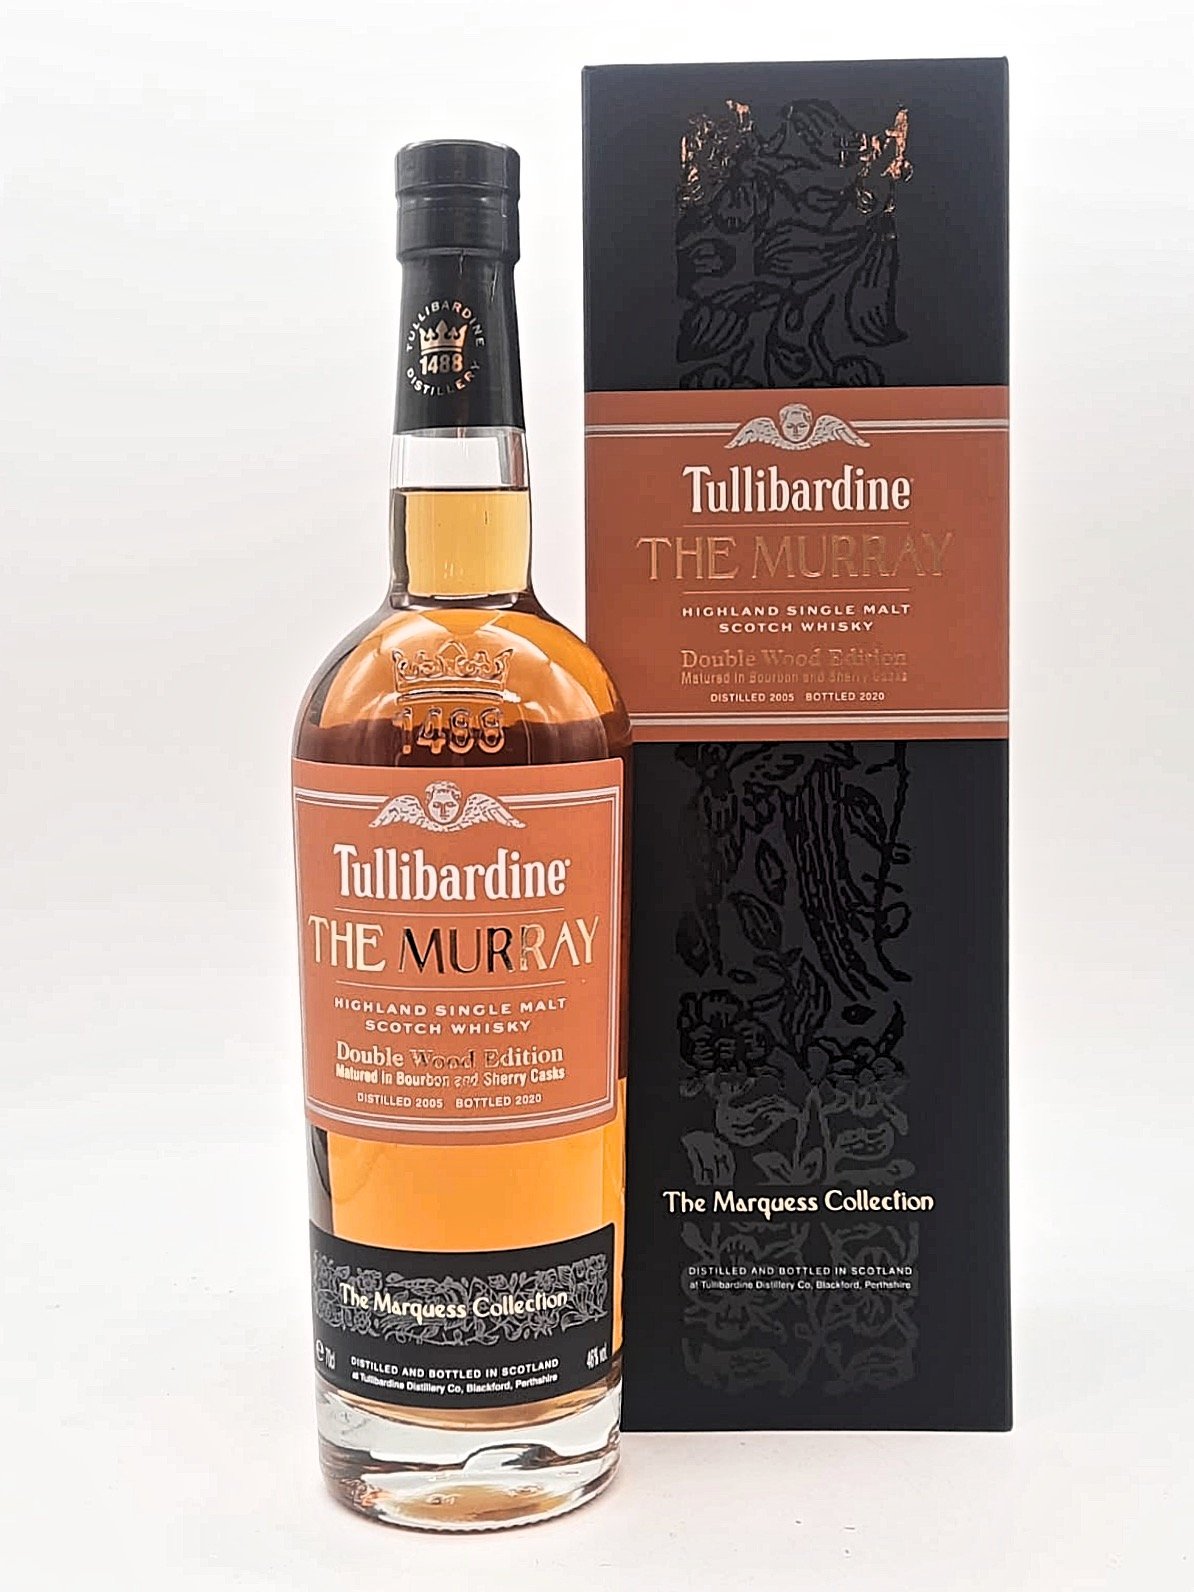 Tullibardine The Murray Double Wood Edition 2005/2020 The Marquess Collection Highland Single Malt Scotch Whisky 